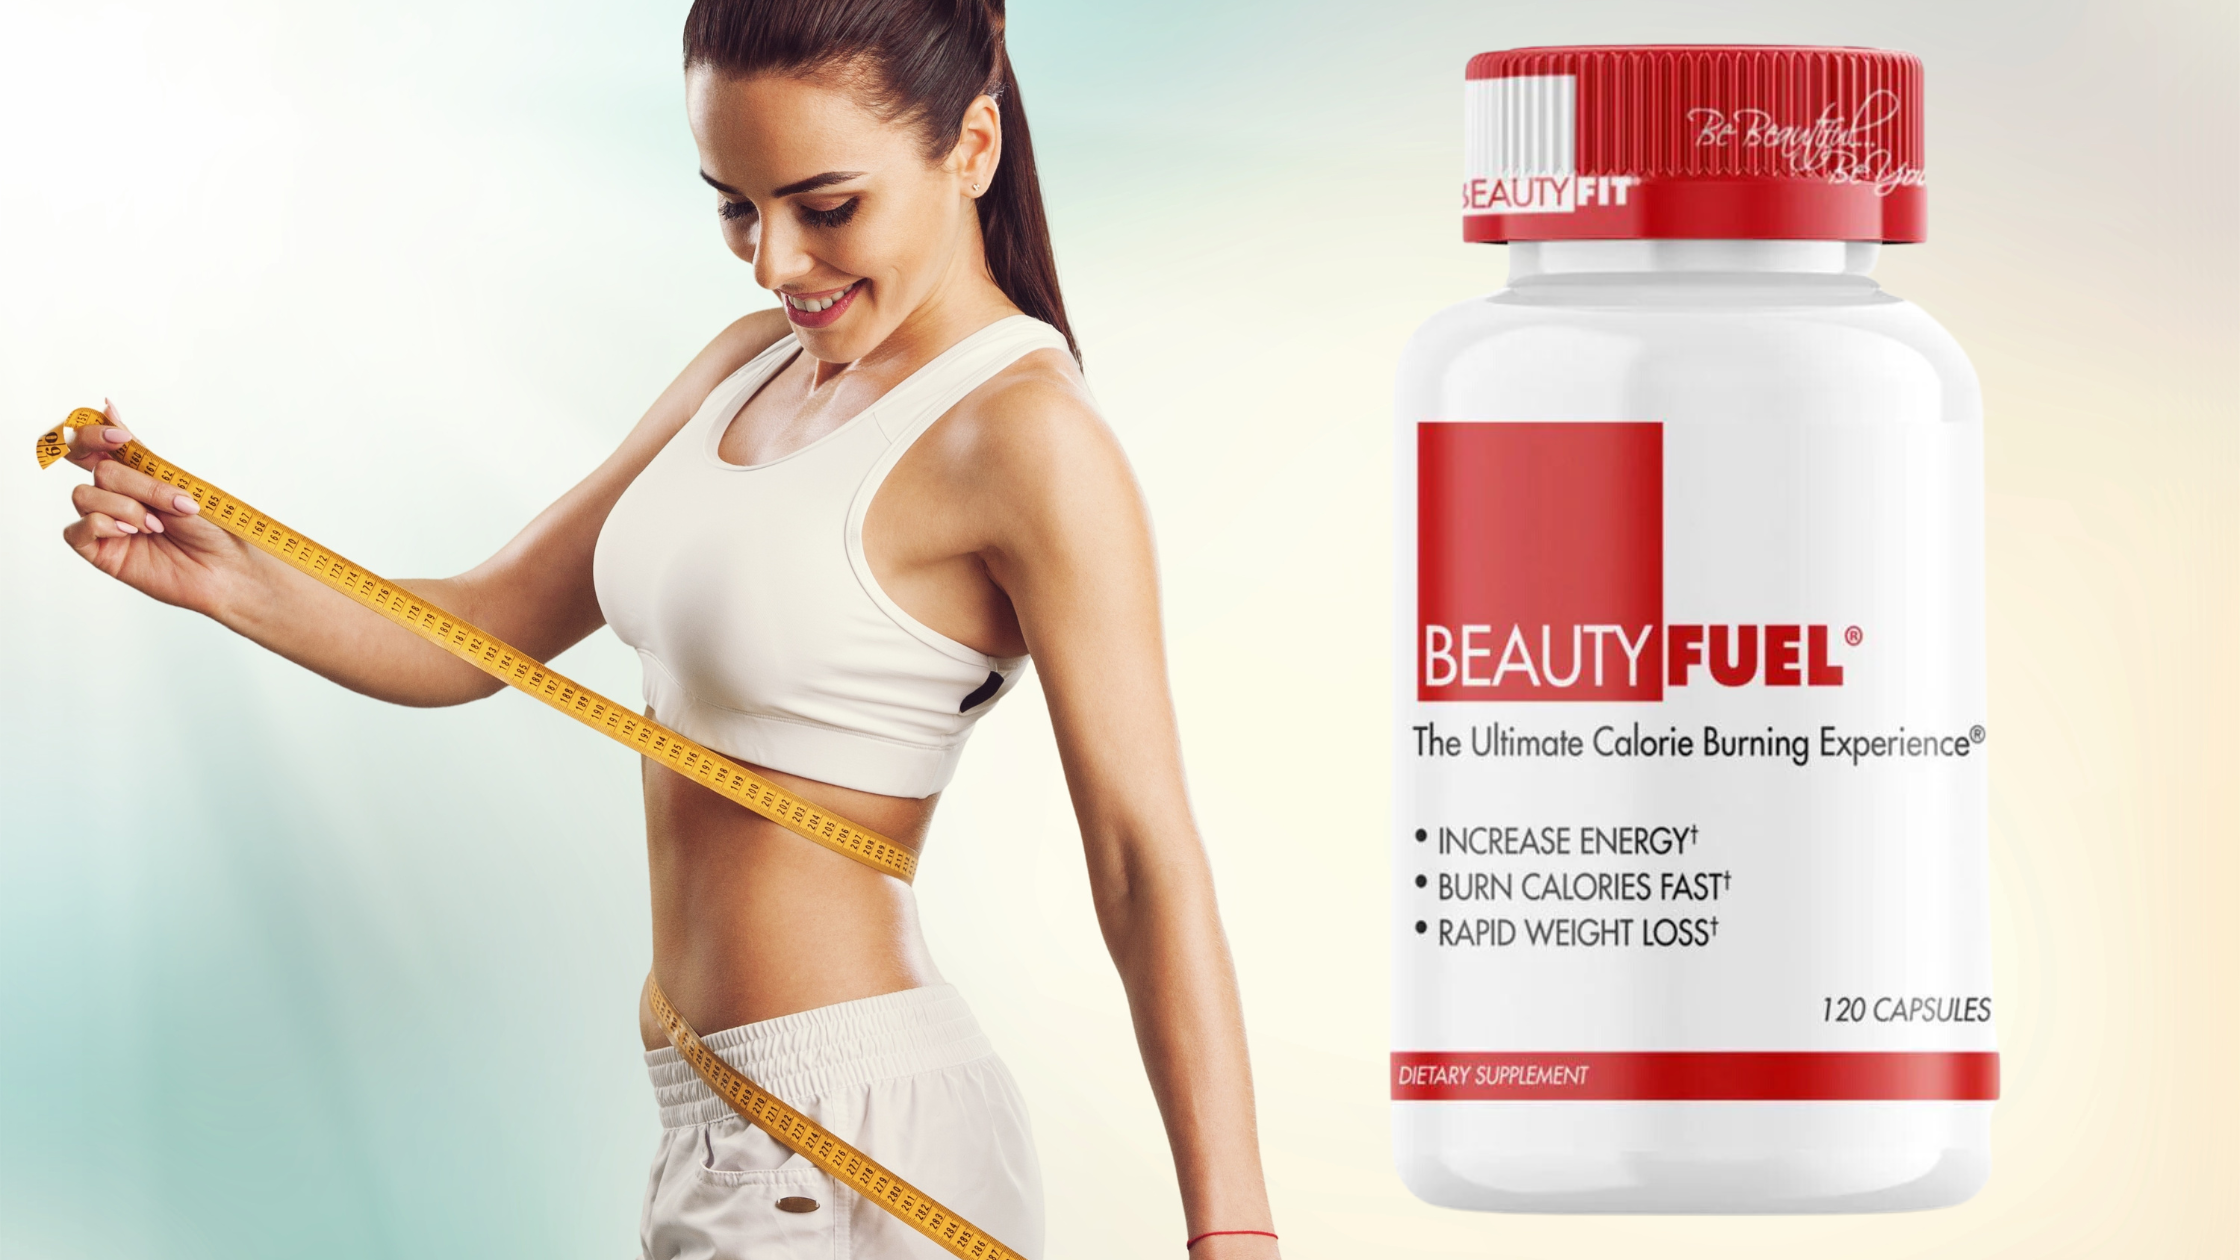 Energize Your Weight Loss Journey with BeautyFuel®